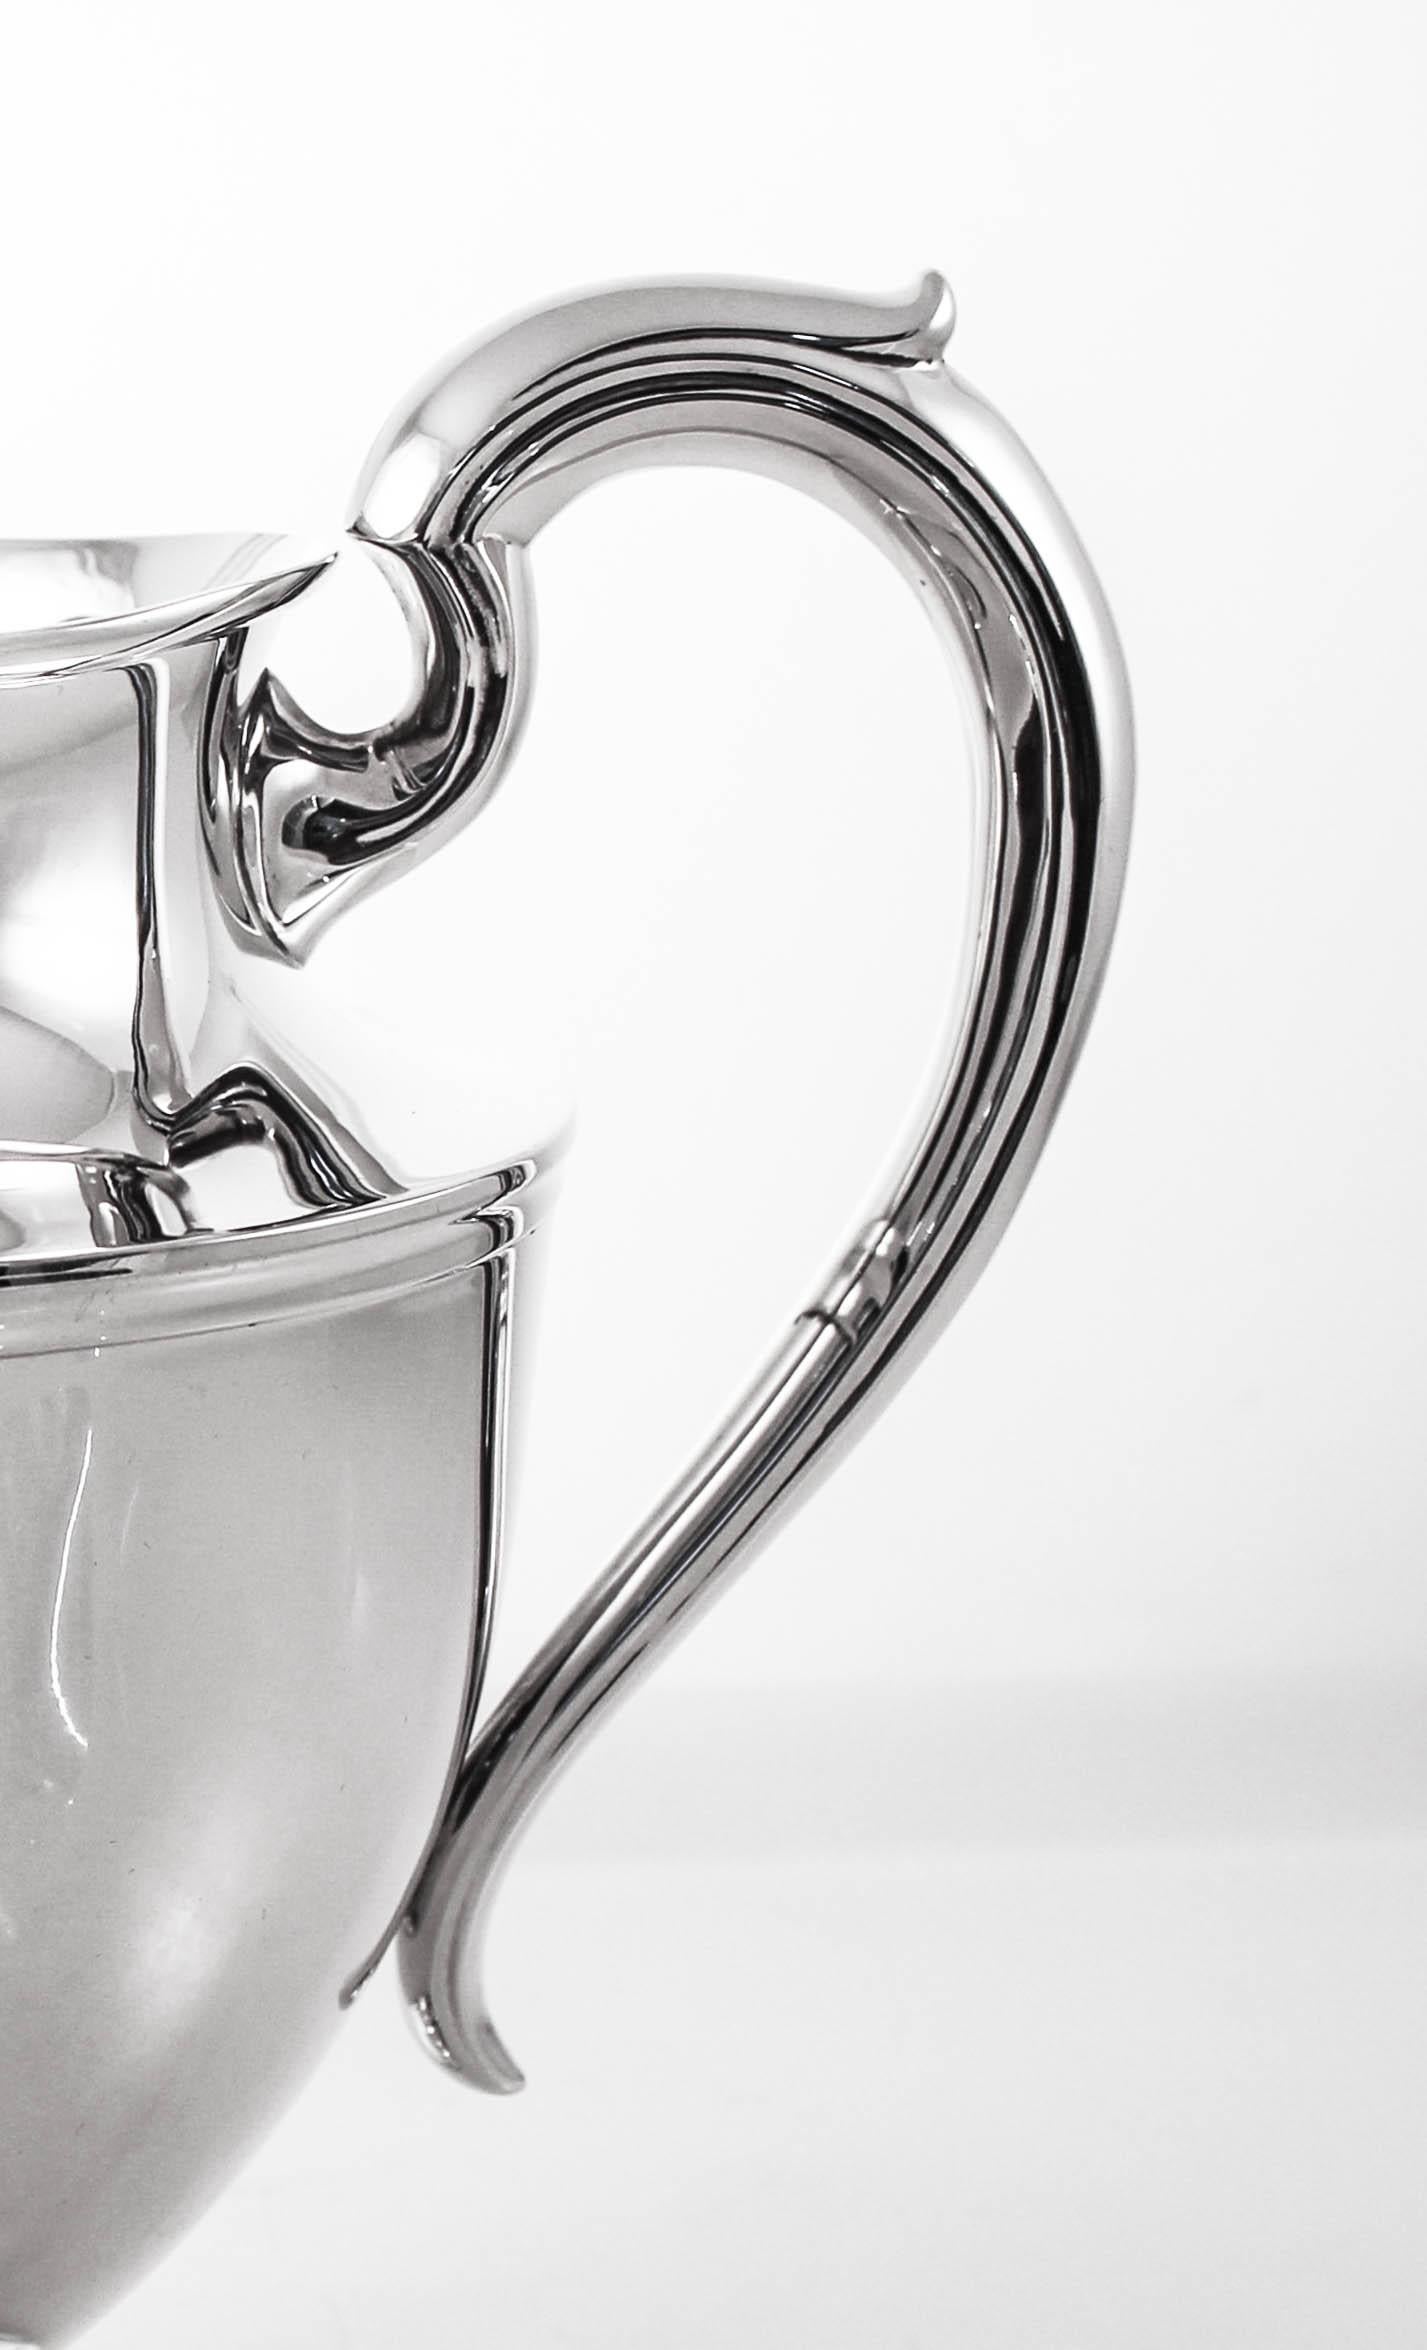 Proudly offer this sterling silver water pitcher by La Pierre Co of New York. A sleek and un-ornate piece, it will match any flatware, dishes and stemware. It has a universal look that blends beautifully with either a fussy or simple decor.